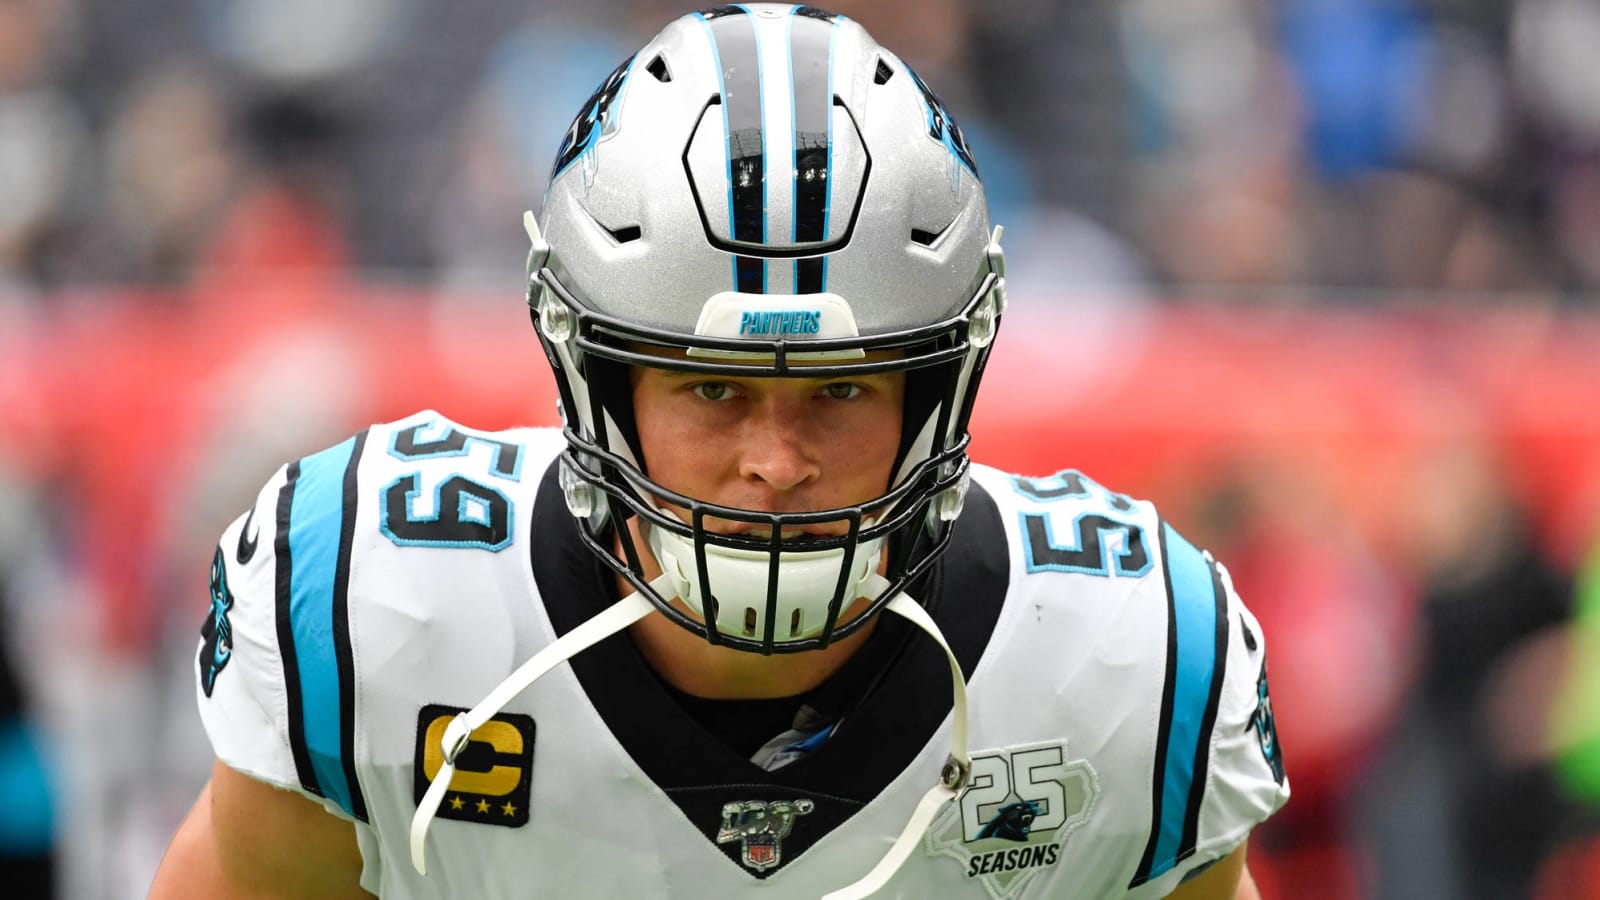 This story shows Luke Kuechly’s crazy dedication to football